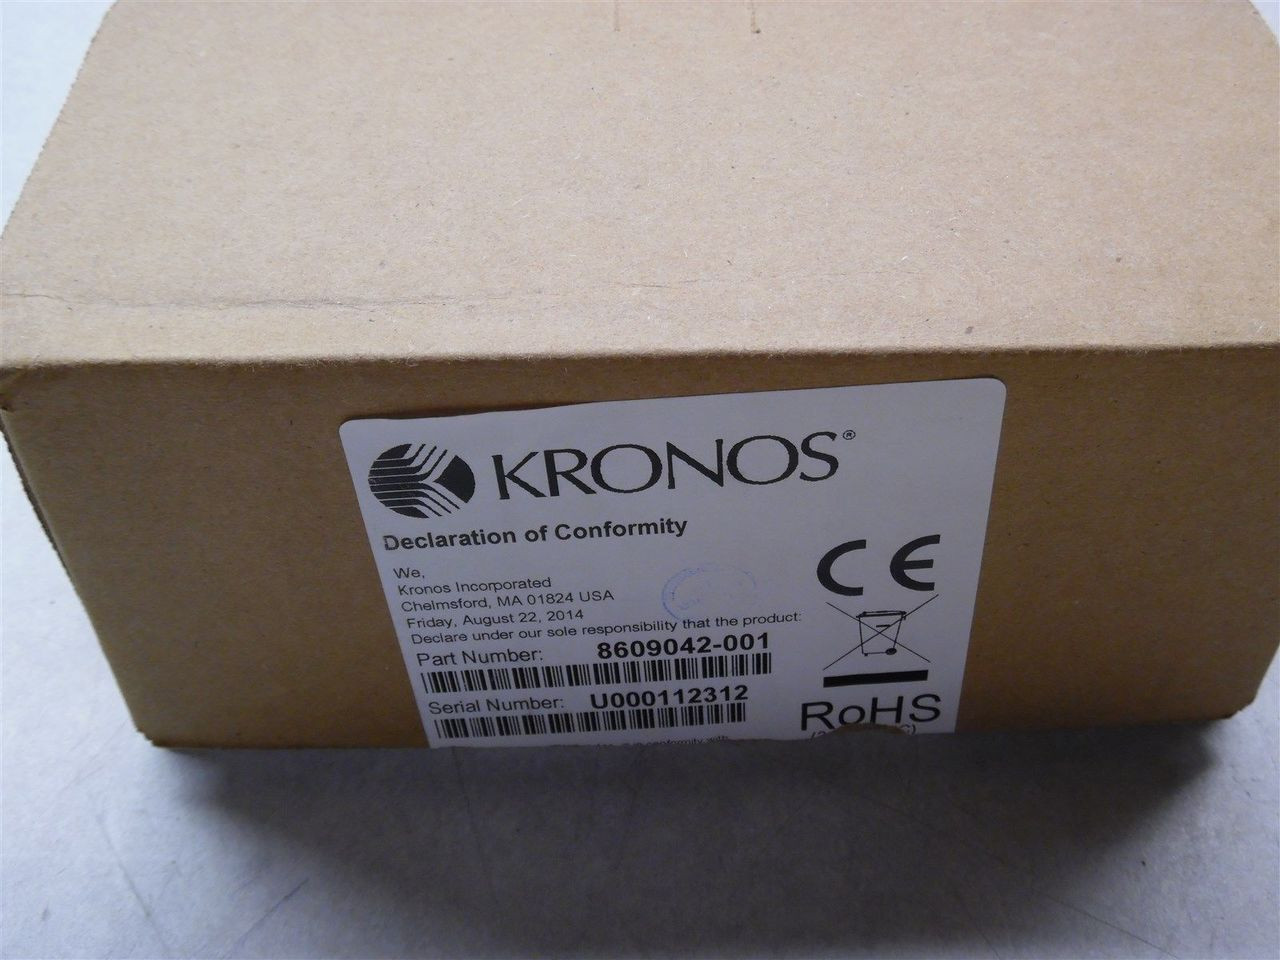 Kronos Touch ID Plus H3 / H4 Intouch 9000 9100 Biometric Reader 8609042-001  Brand New Factory Sealed - Magnolia Trading